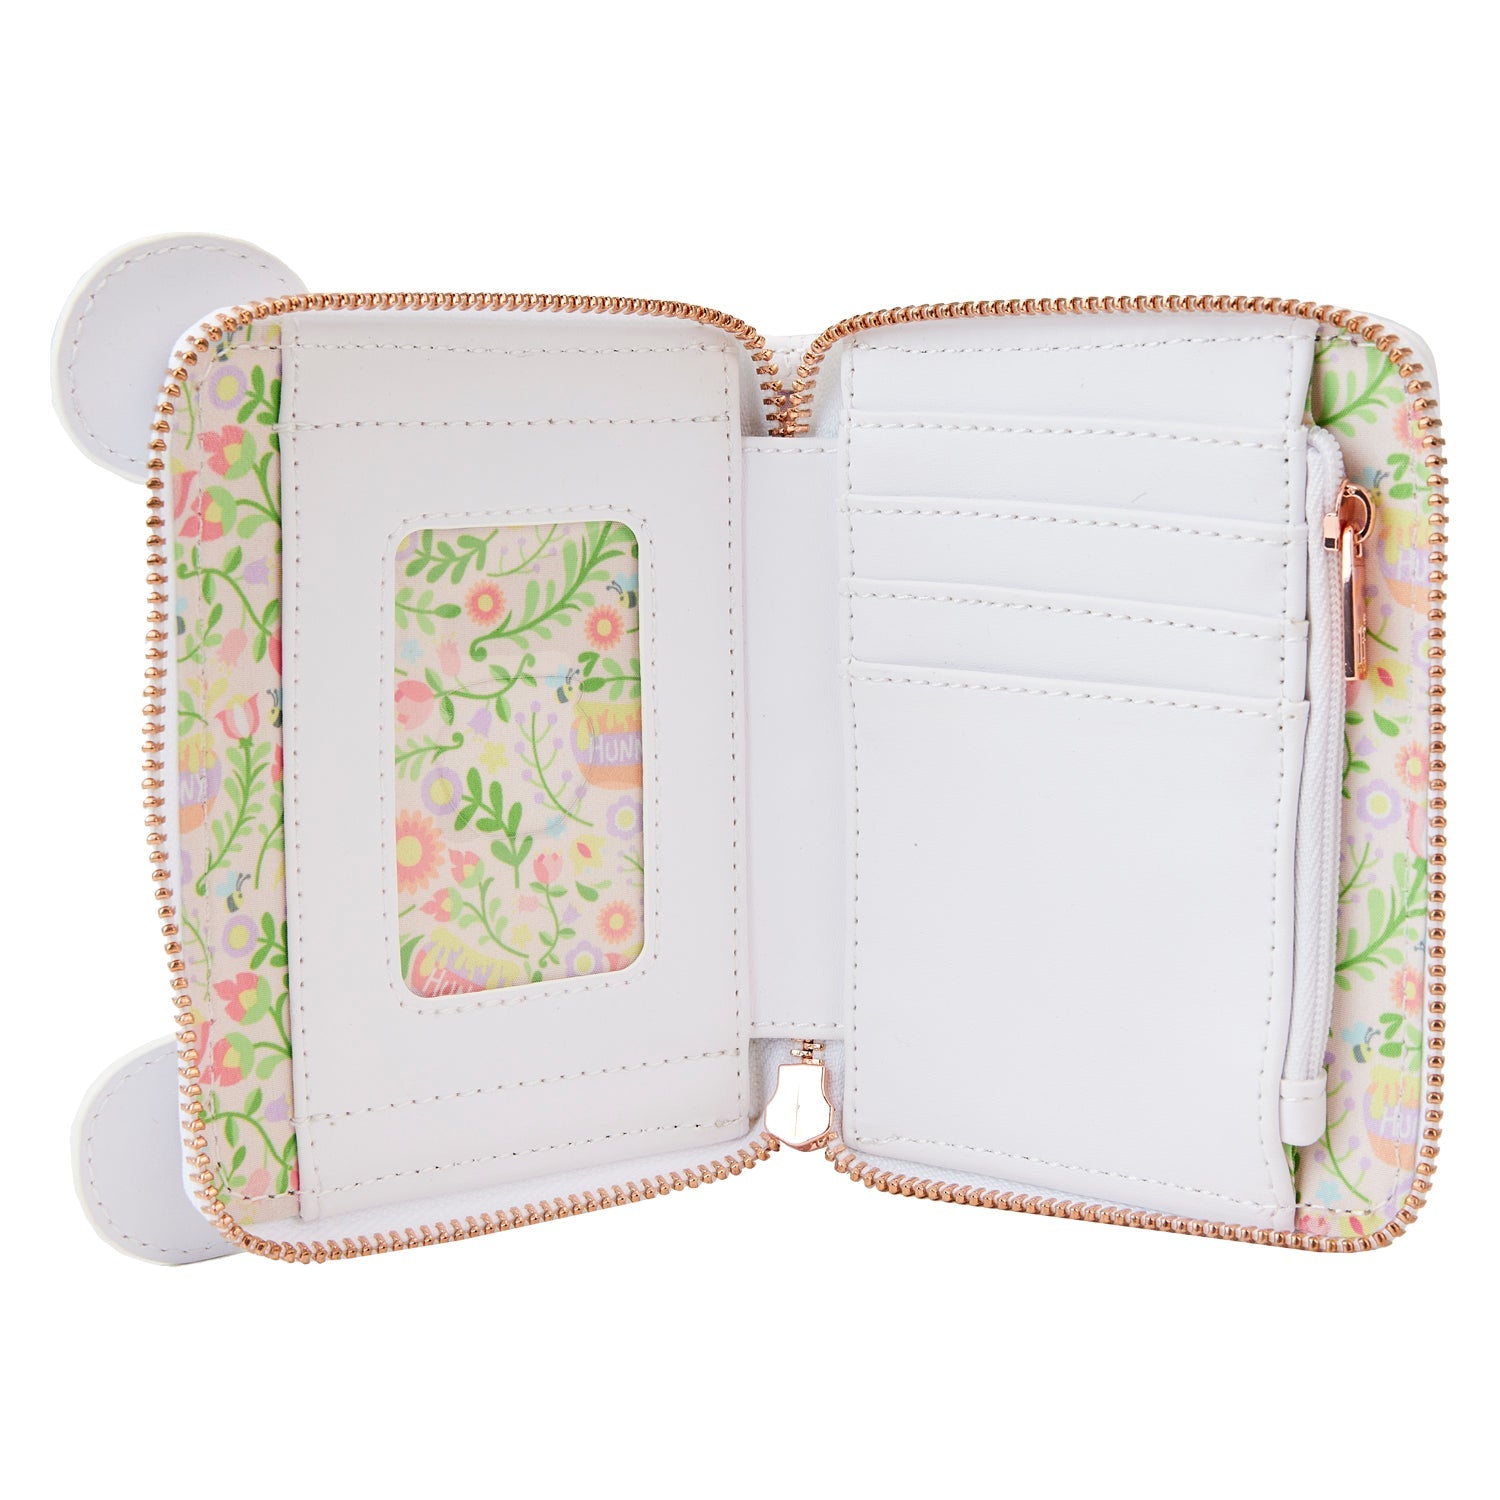 Loungefly x Disney Winnie the Pooh Floral Purse - GeekCore